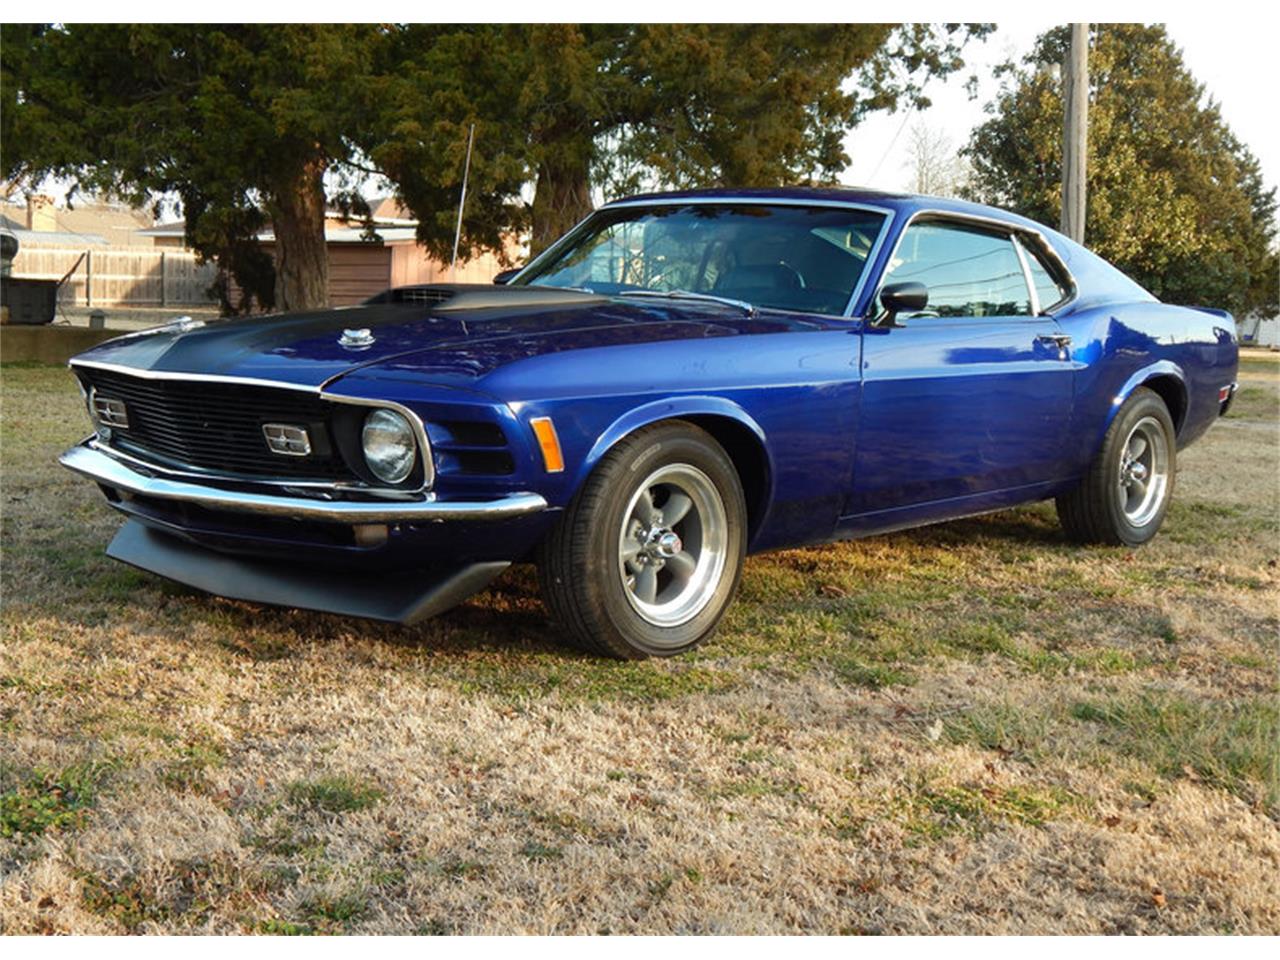 1970 Ford Mustang for Sale | ClassicCars.com | CC-1066852